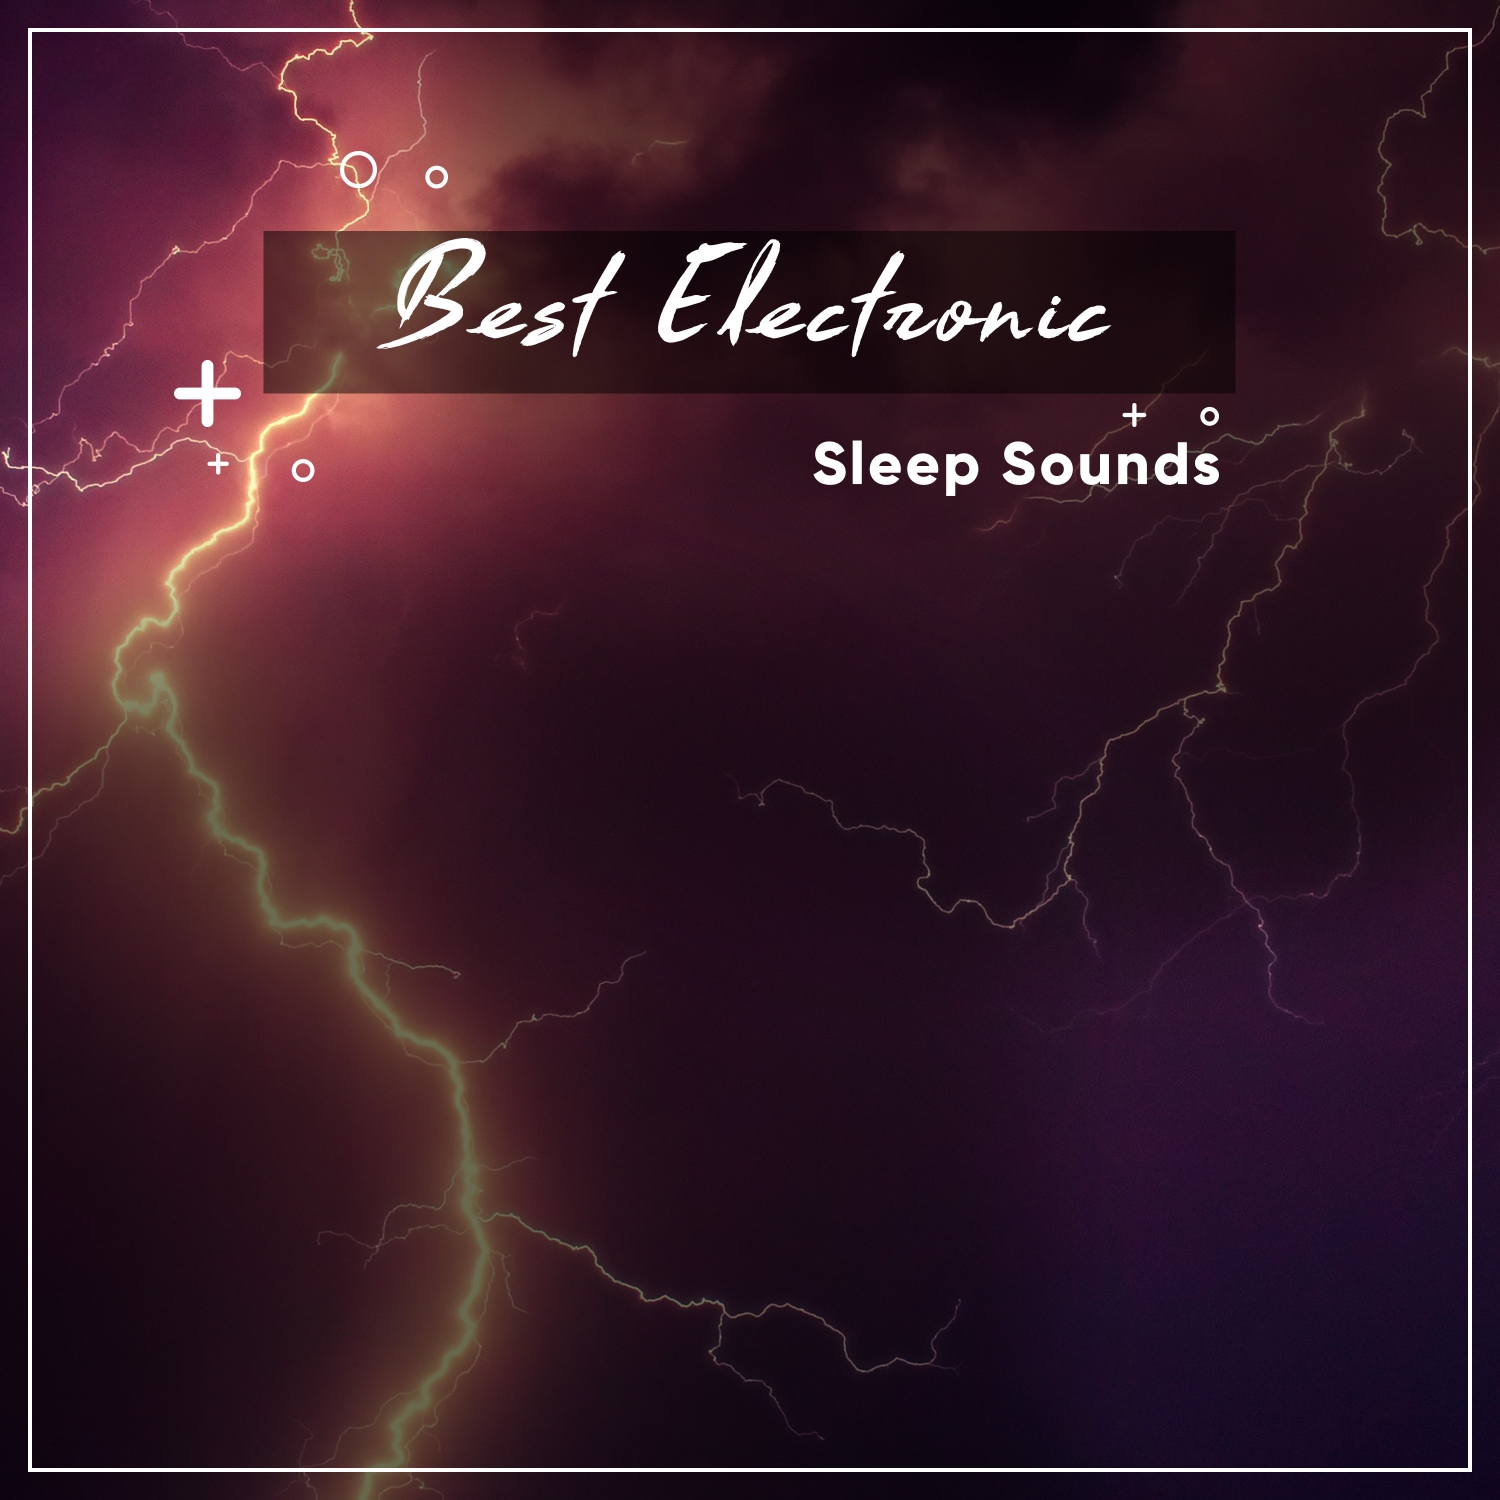 #21 of the Best Electronic Sounds for Deep Sleep